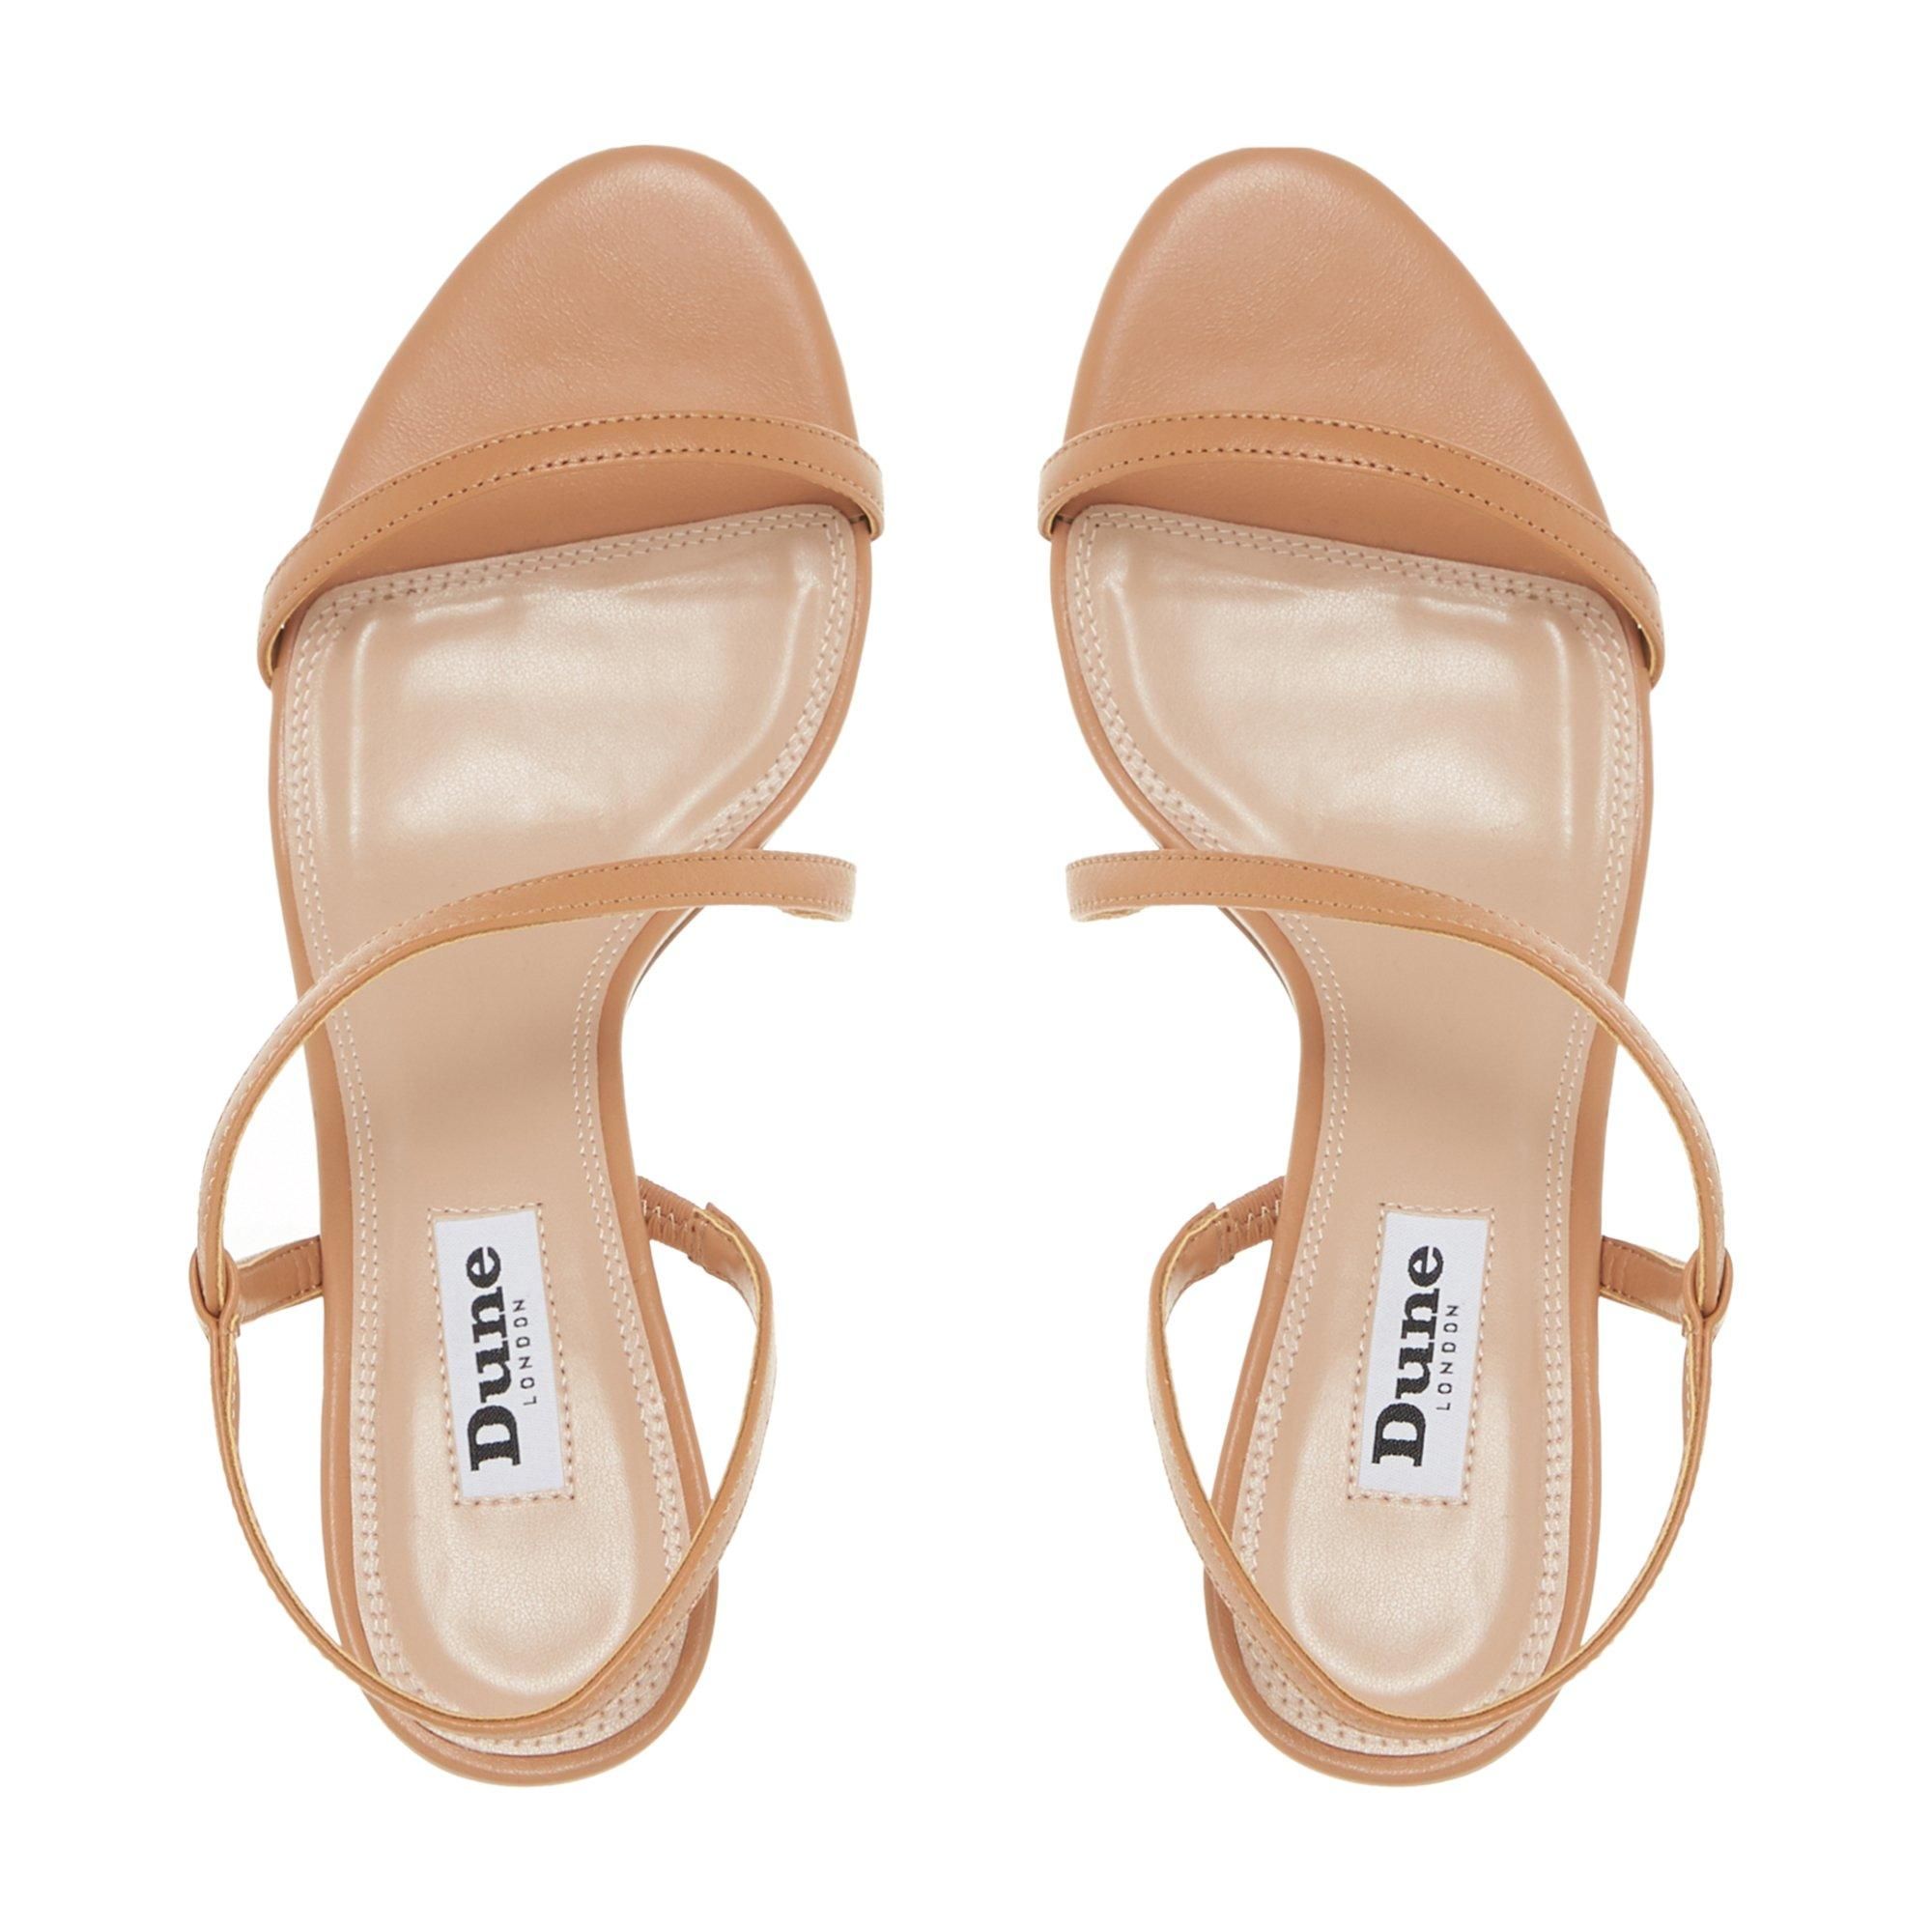 This sandal by Dune London is a simple yet stylish evening option. Showcasing a feminine asymmetric strap with a slingback design. It features an open sandal toe and rests on a mid stiletto heel.